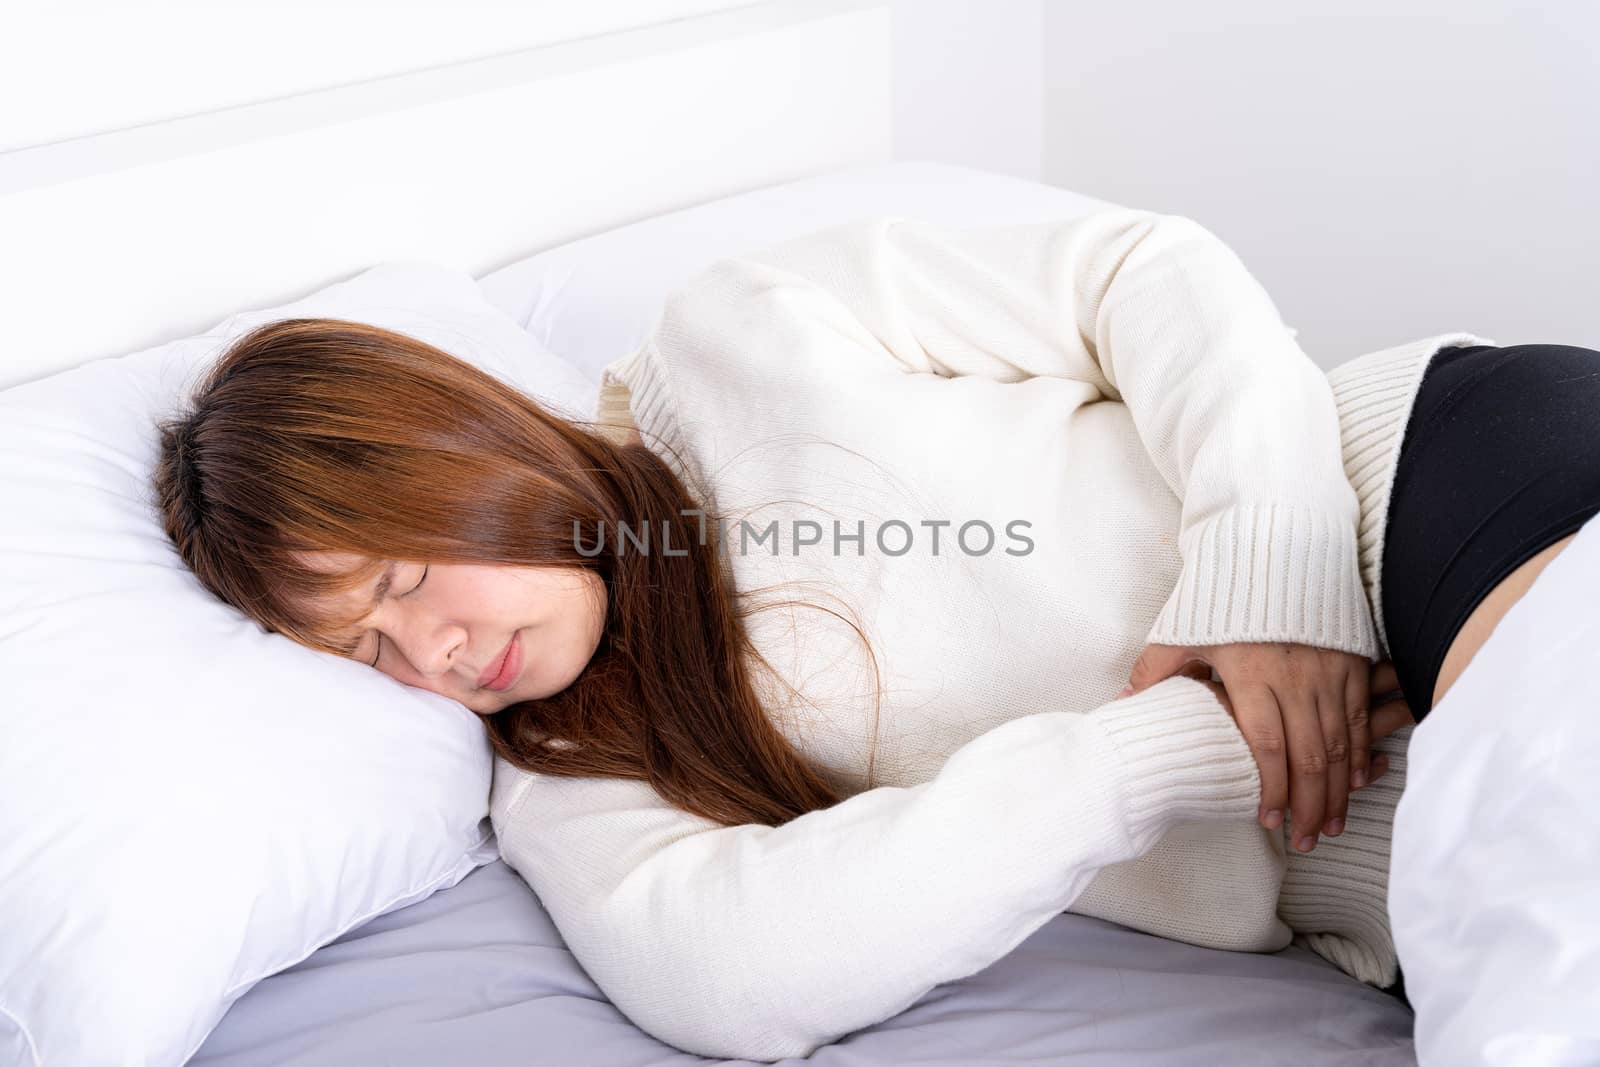 Young woman suffering stomach aches lying on the bed. Healthcare medical or daily life concept.